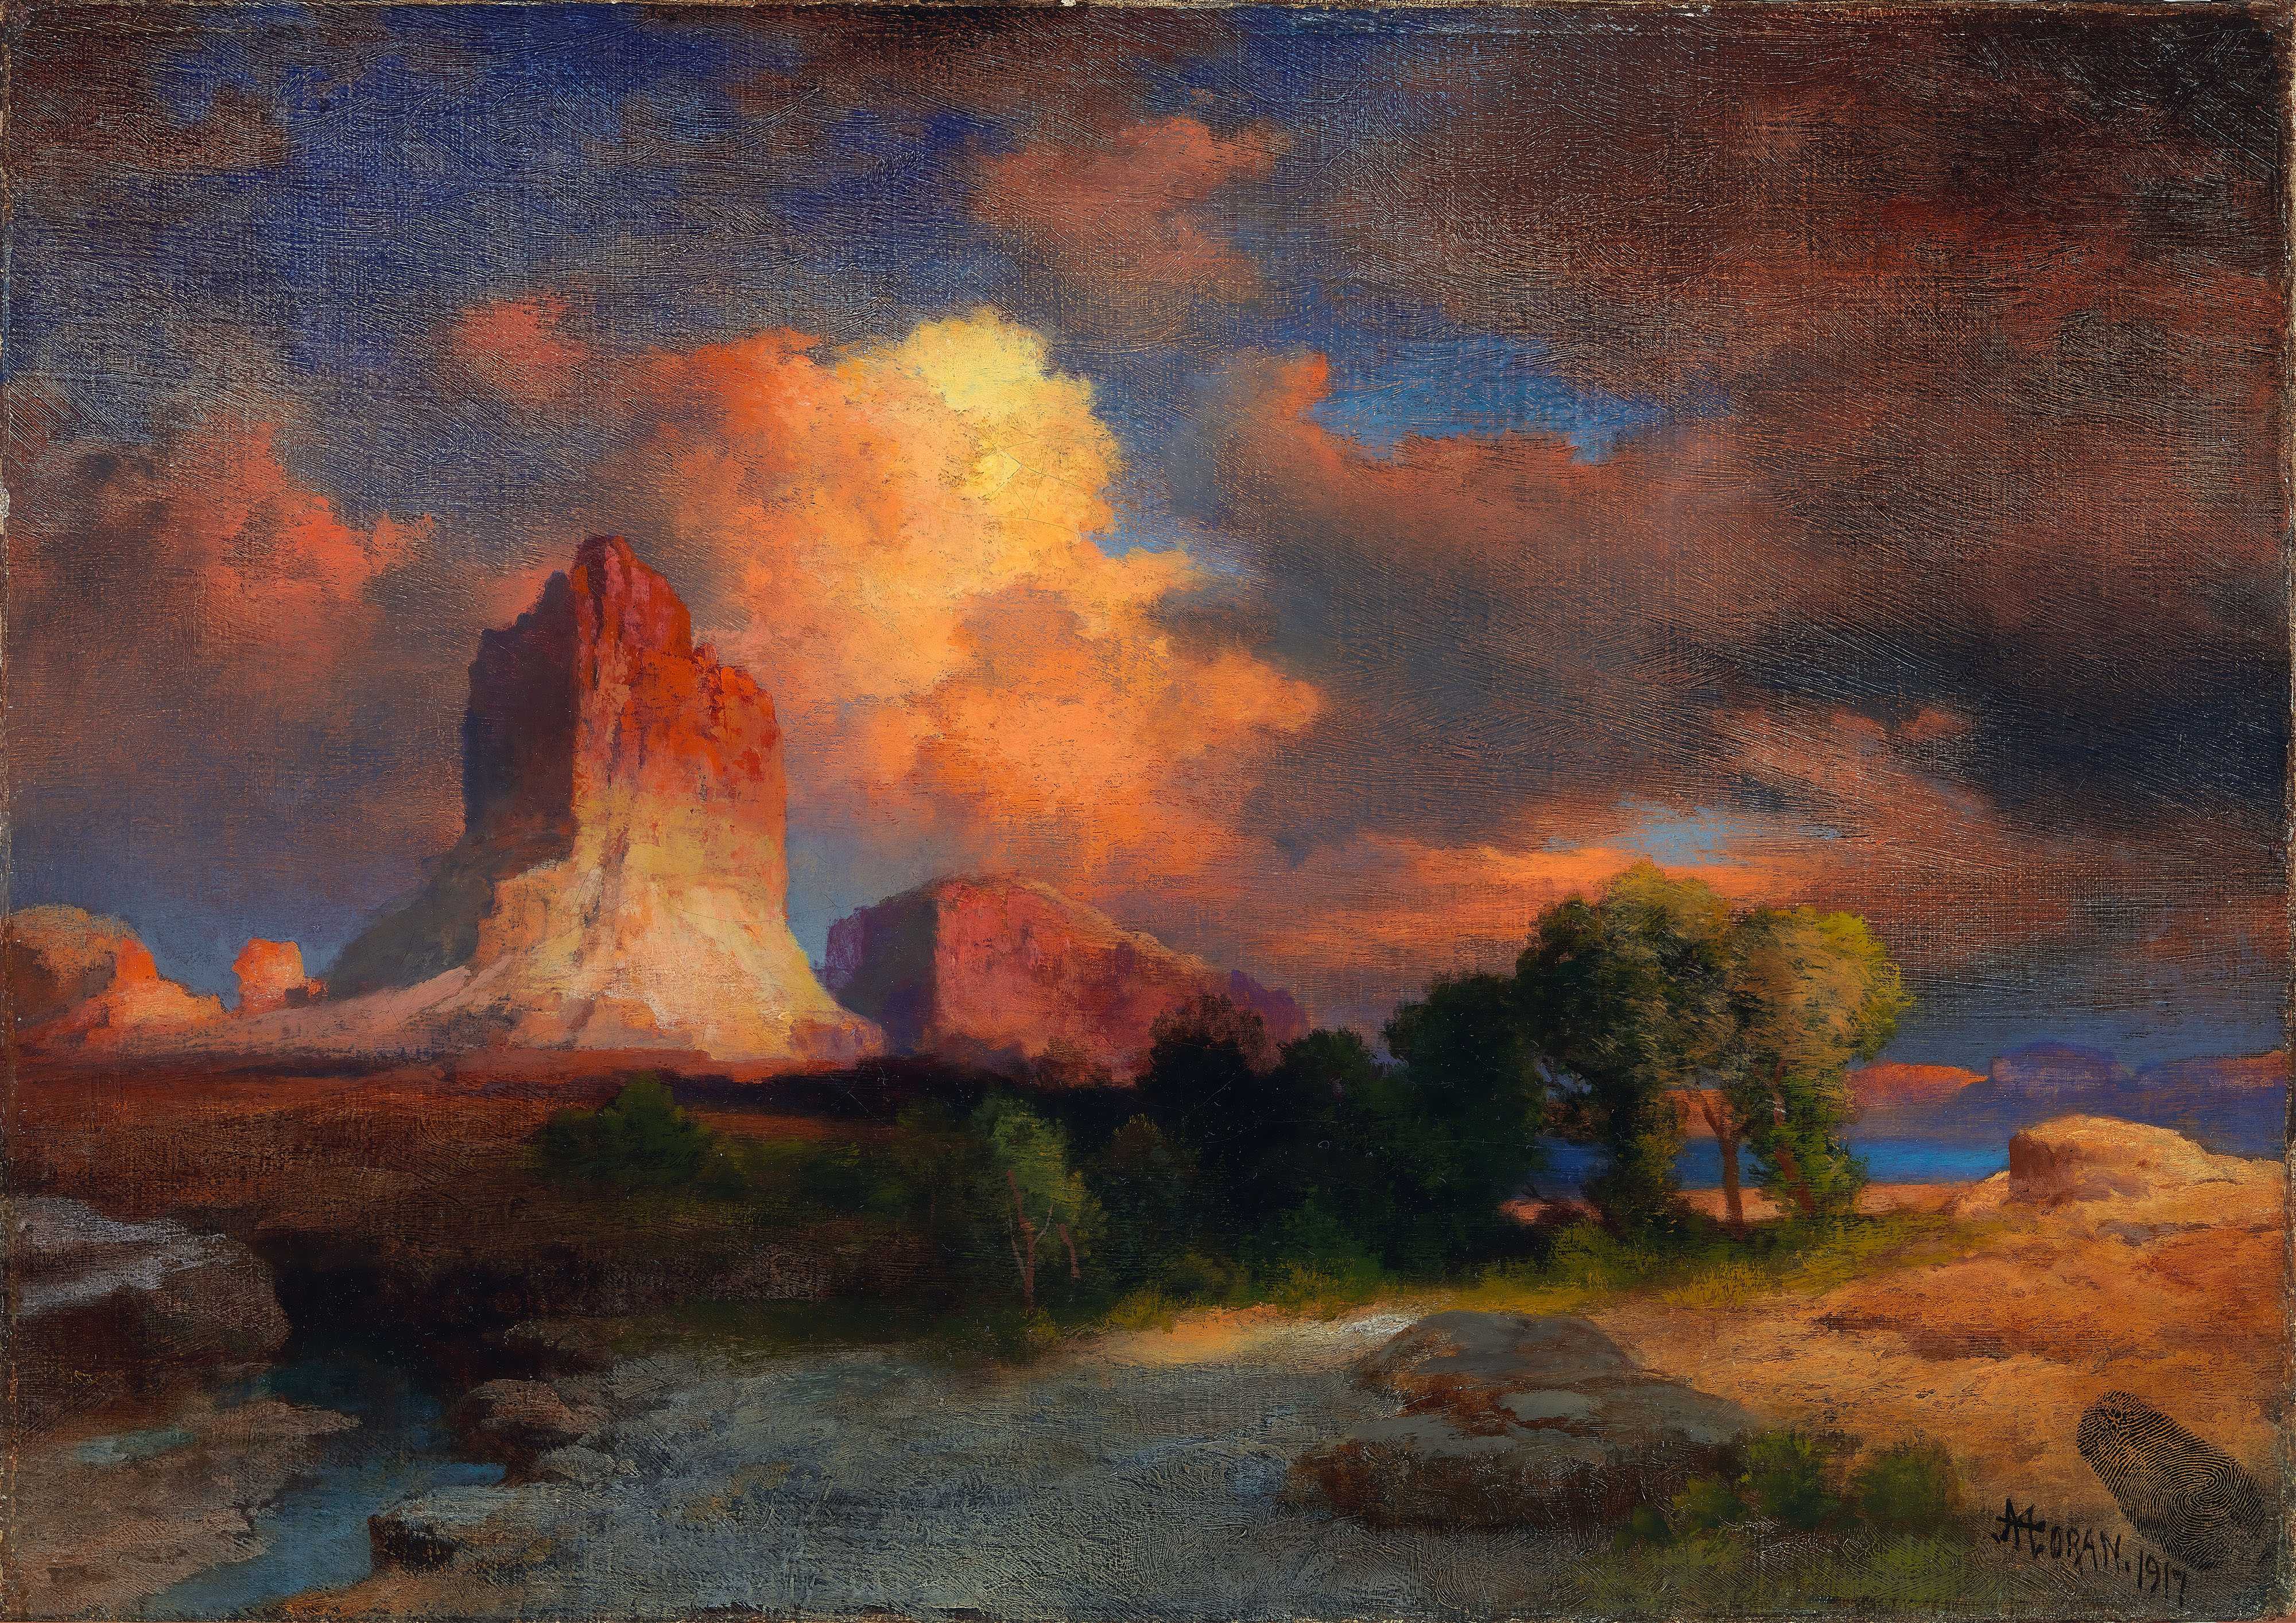 Find out more about Thomas Moran - Sunset Cloud, Green River, Wyoming